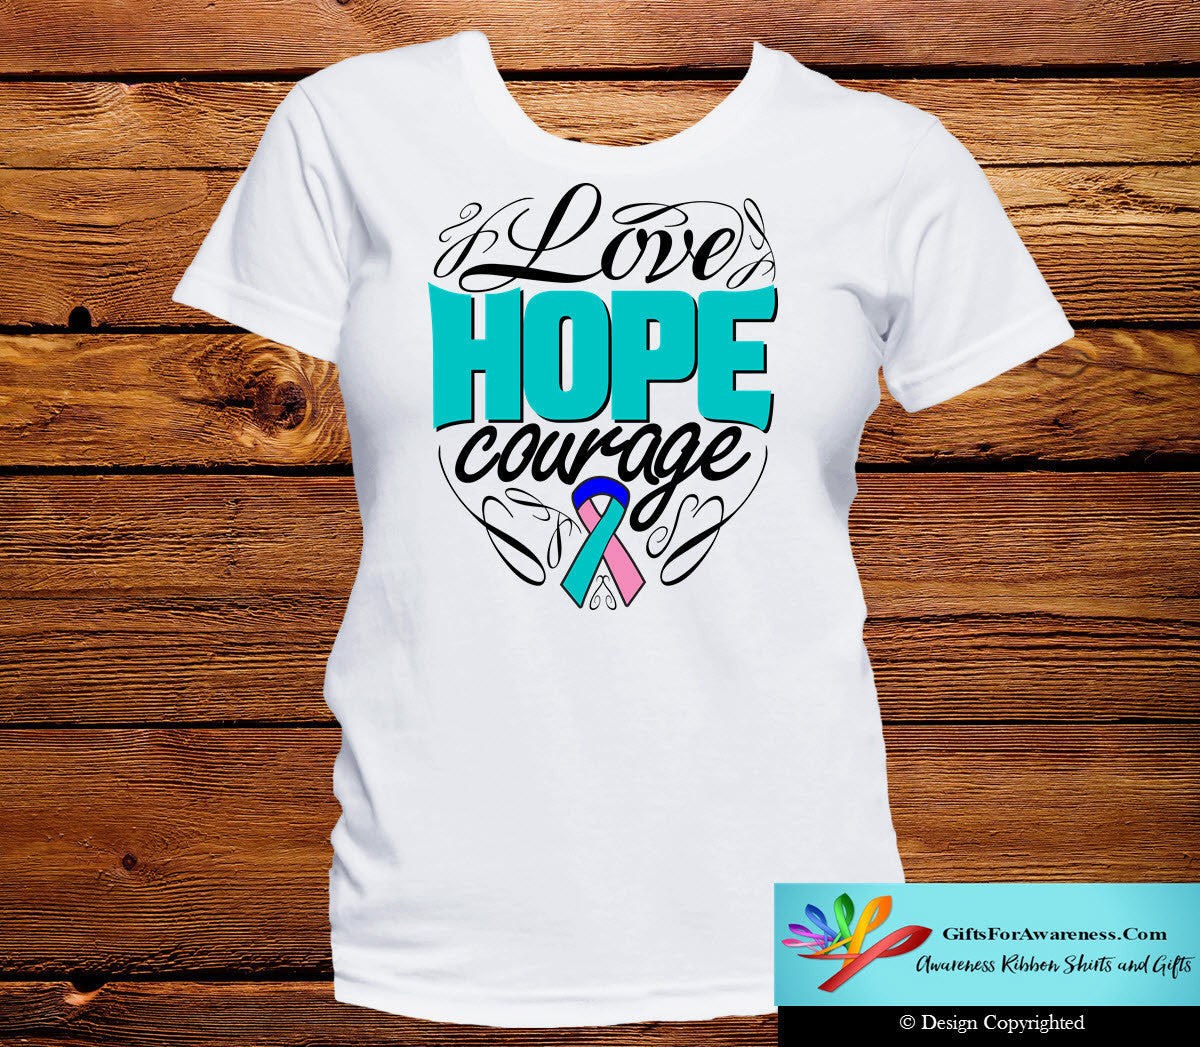 Thyroid Cancer Love Hope Courage Shirts - GiftsForAwareness